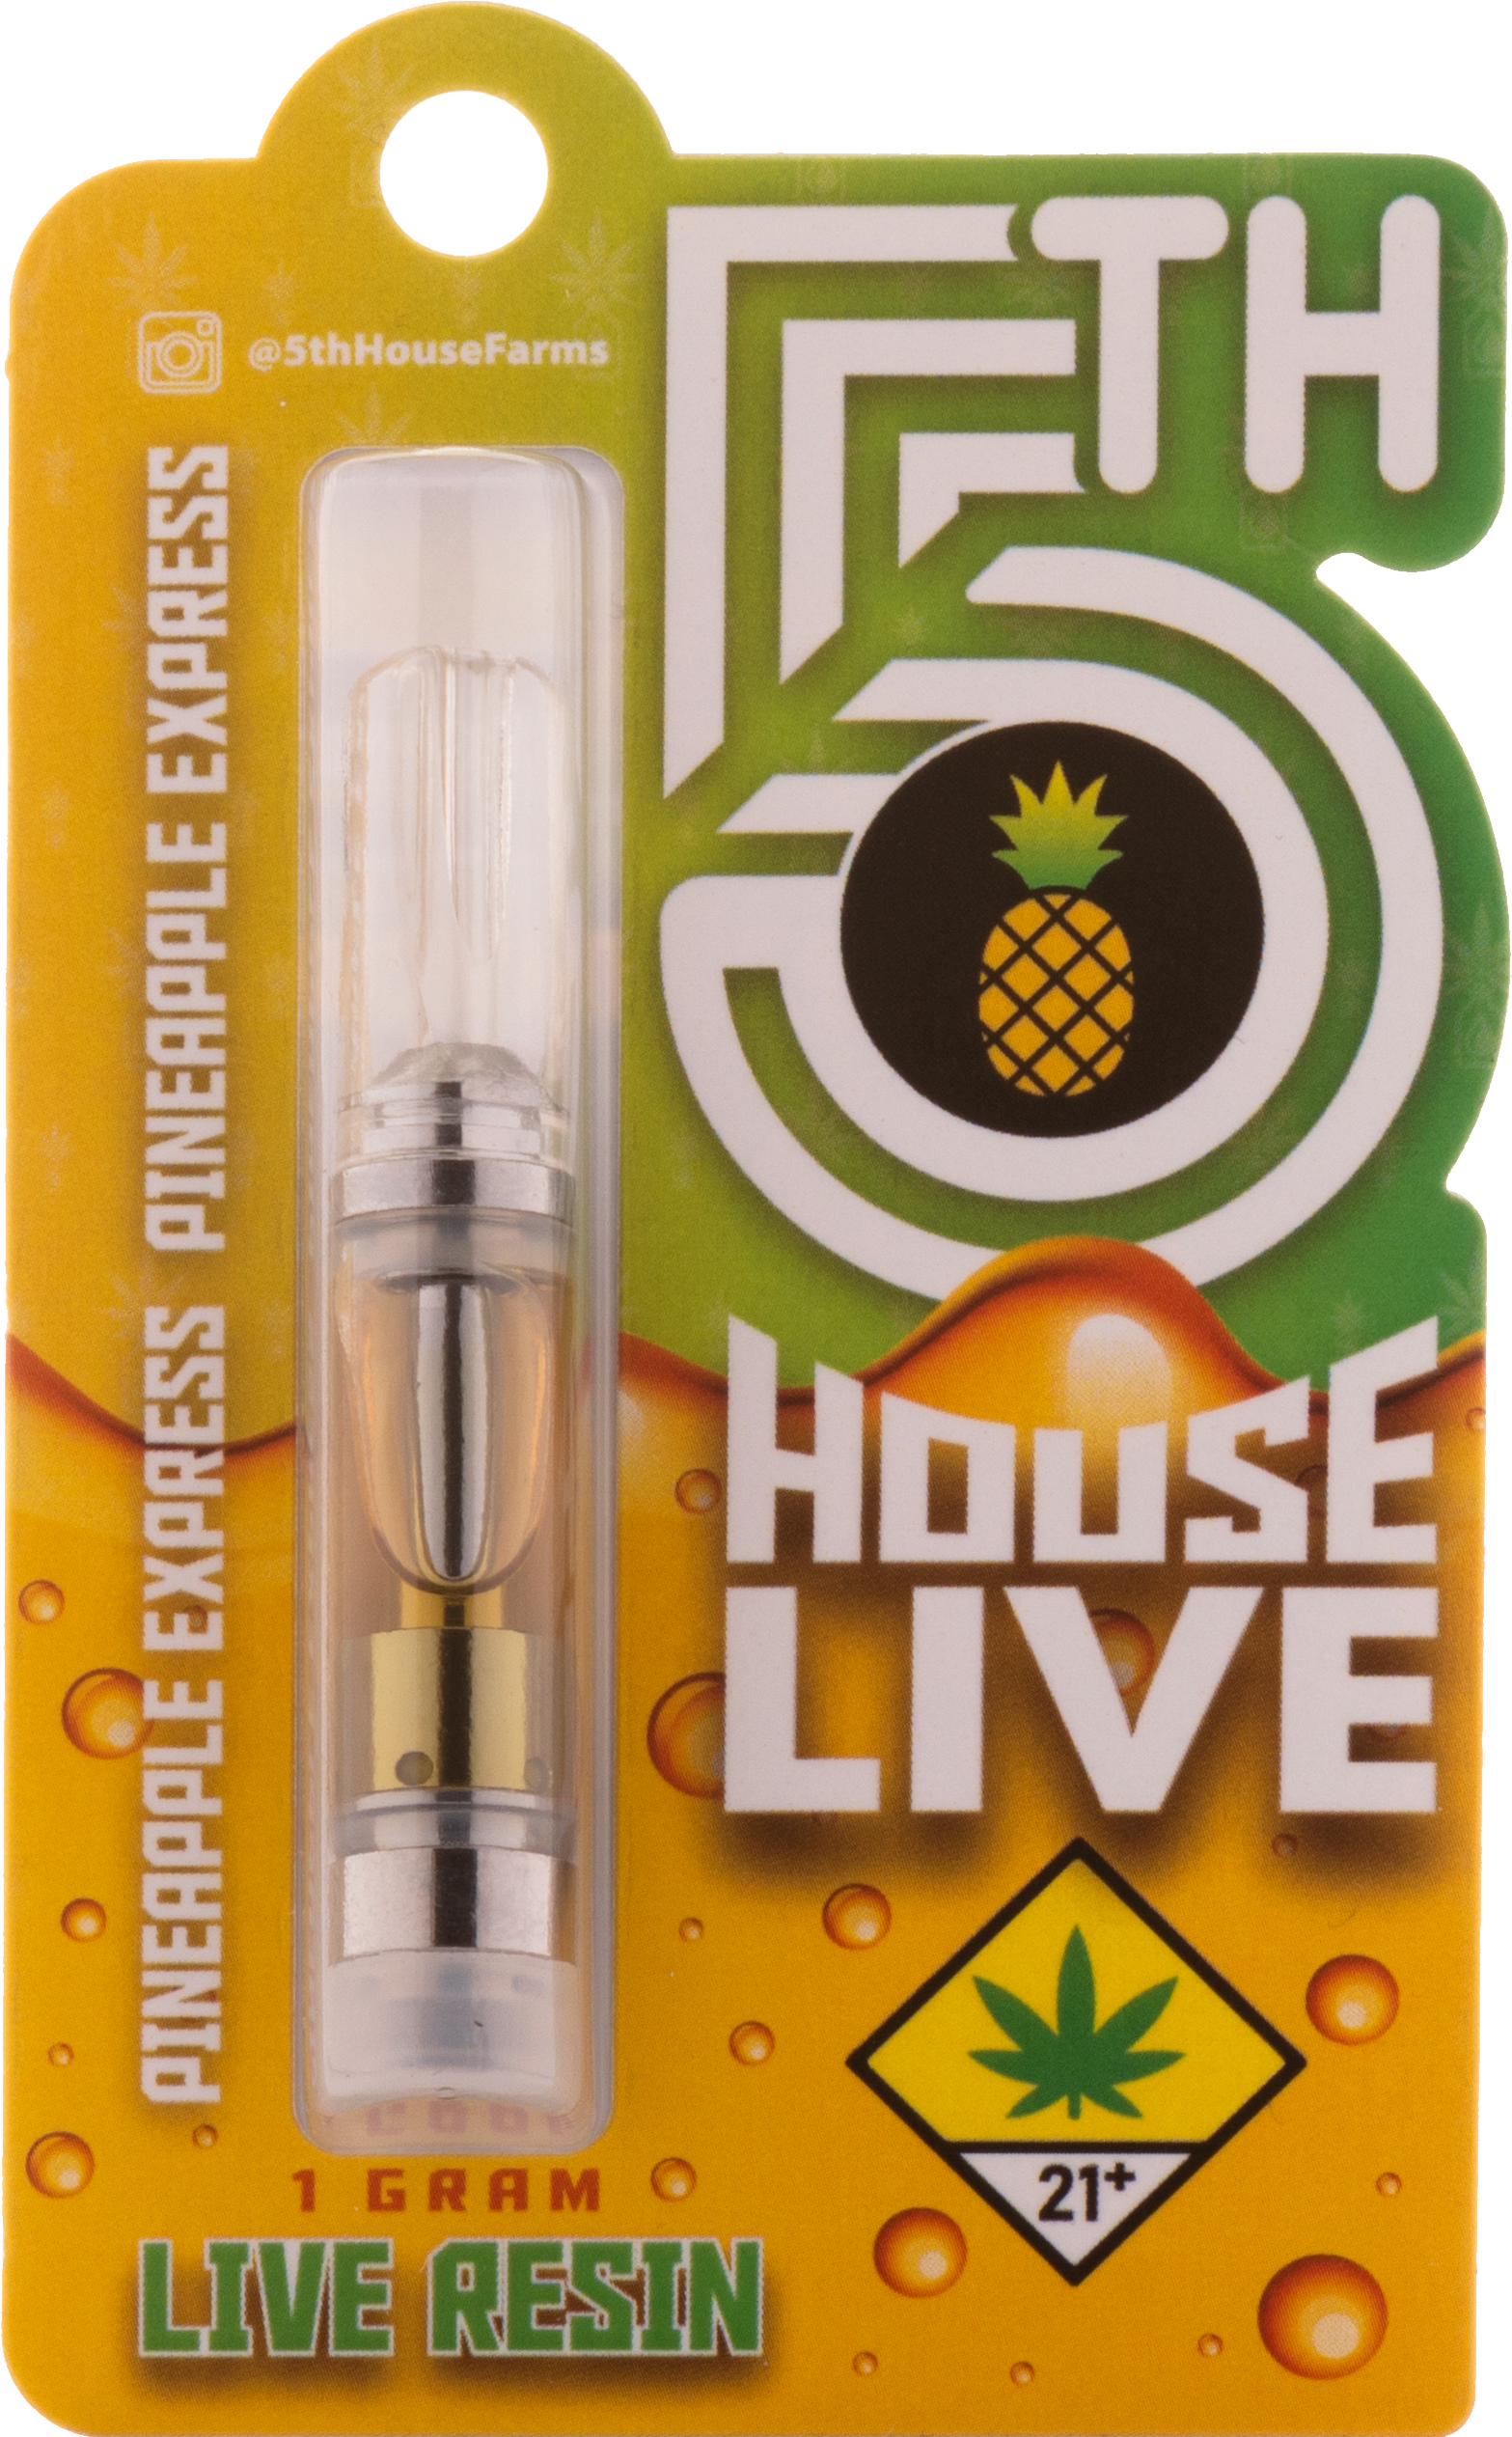 5th House Live Pineapple Express